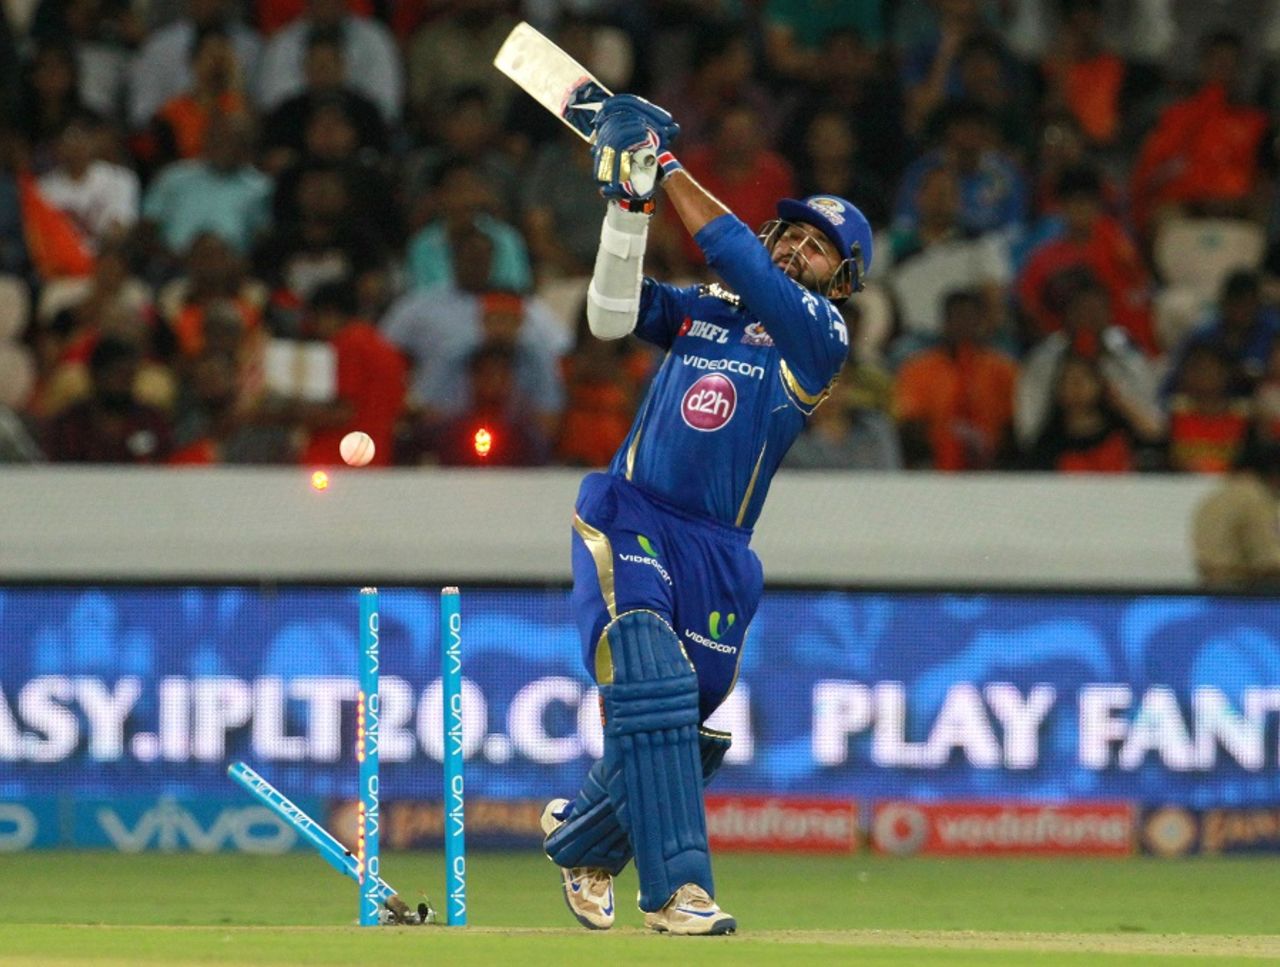 Parthiv Patel's stumps are uprooted after he makes no contact on the slog, Sunrisers Hyderabad v Mumbai Indians, IPL 2016, Hyderabad, April 18, 2016